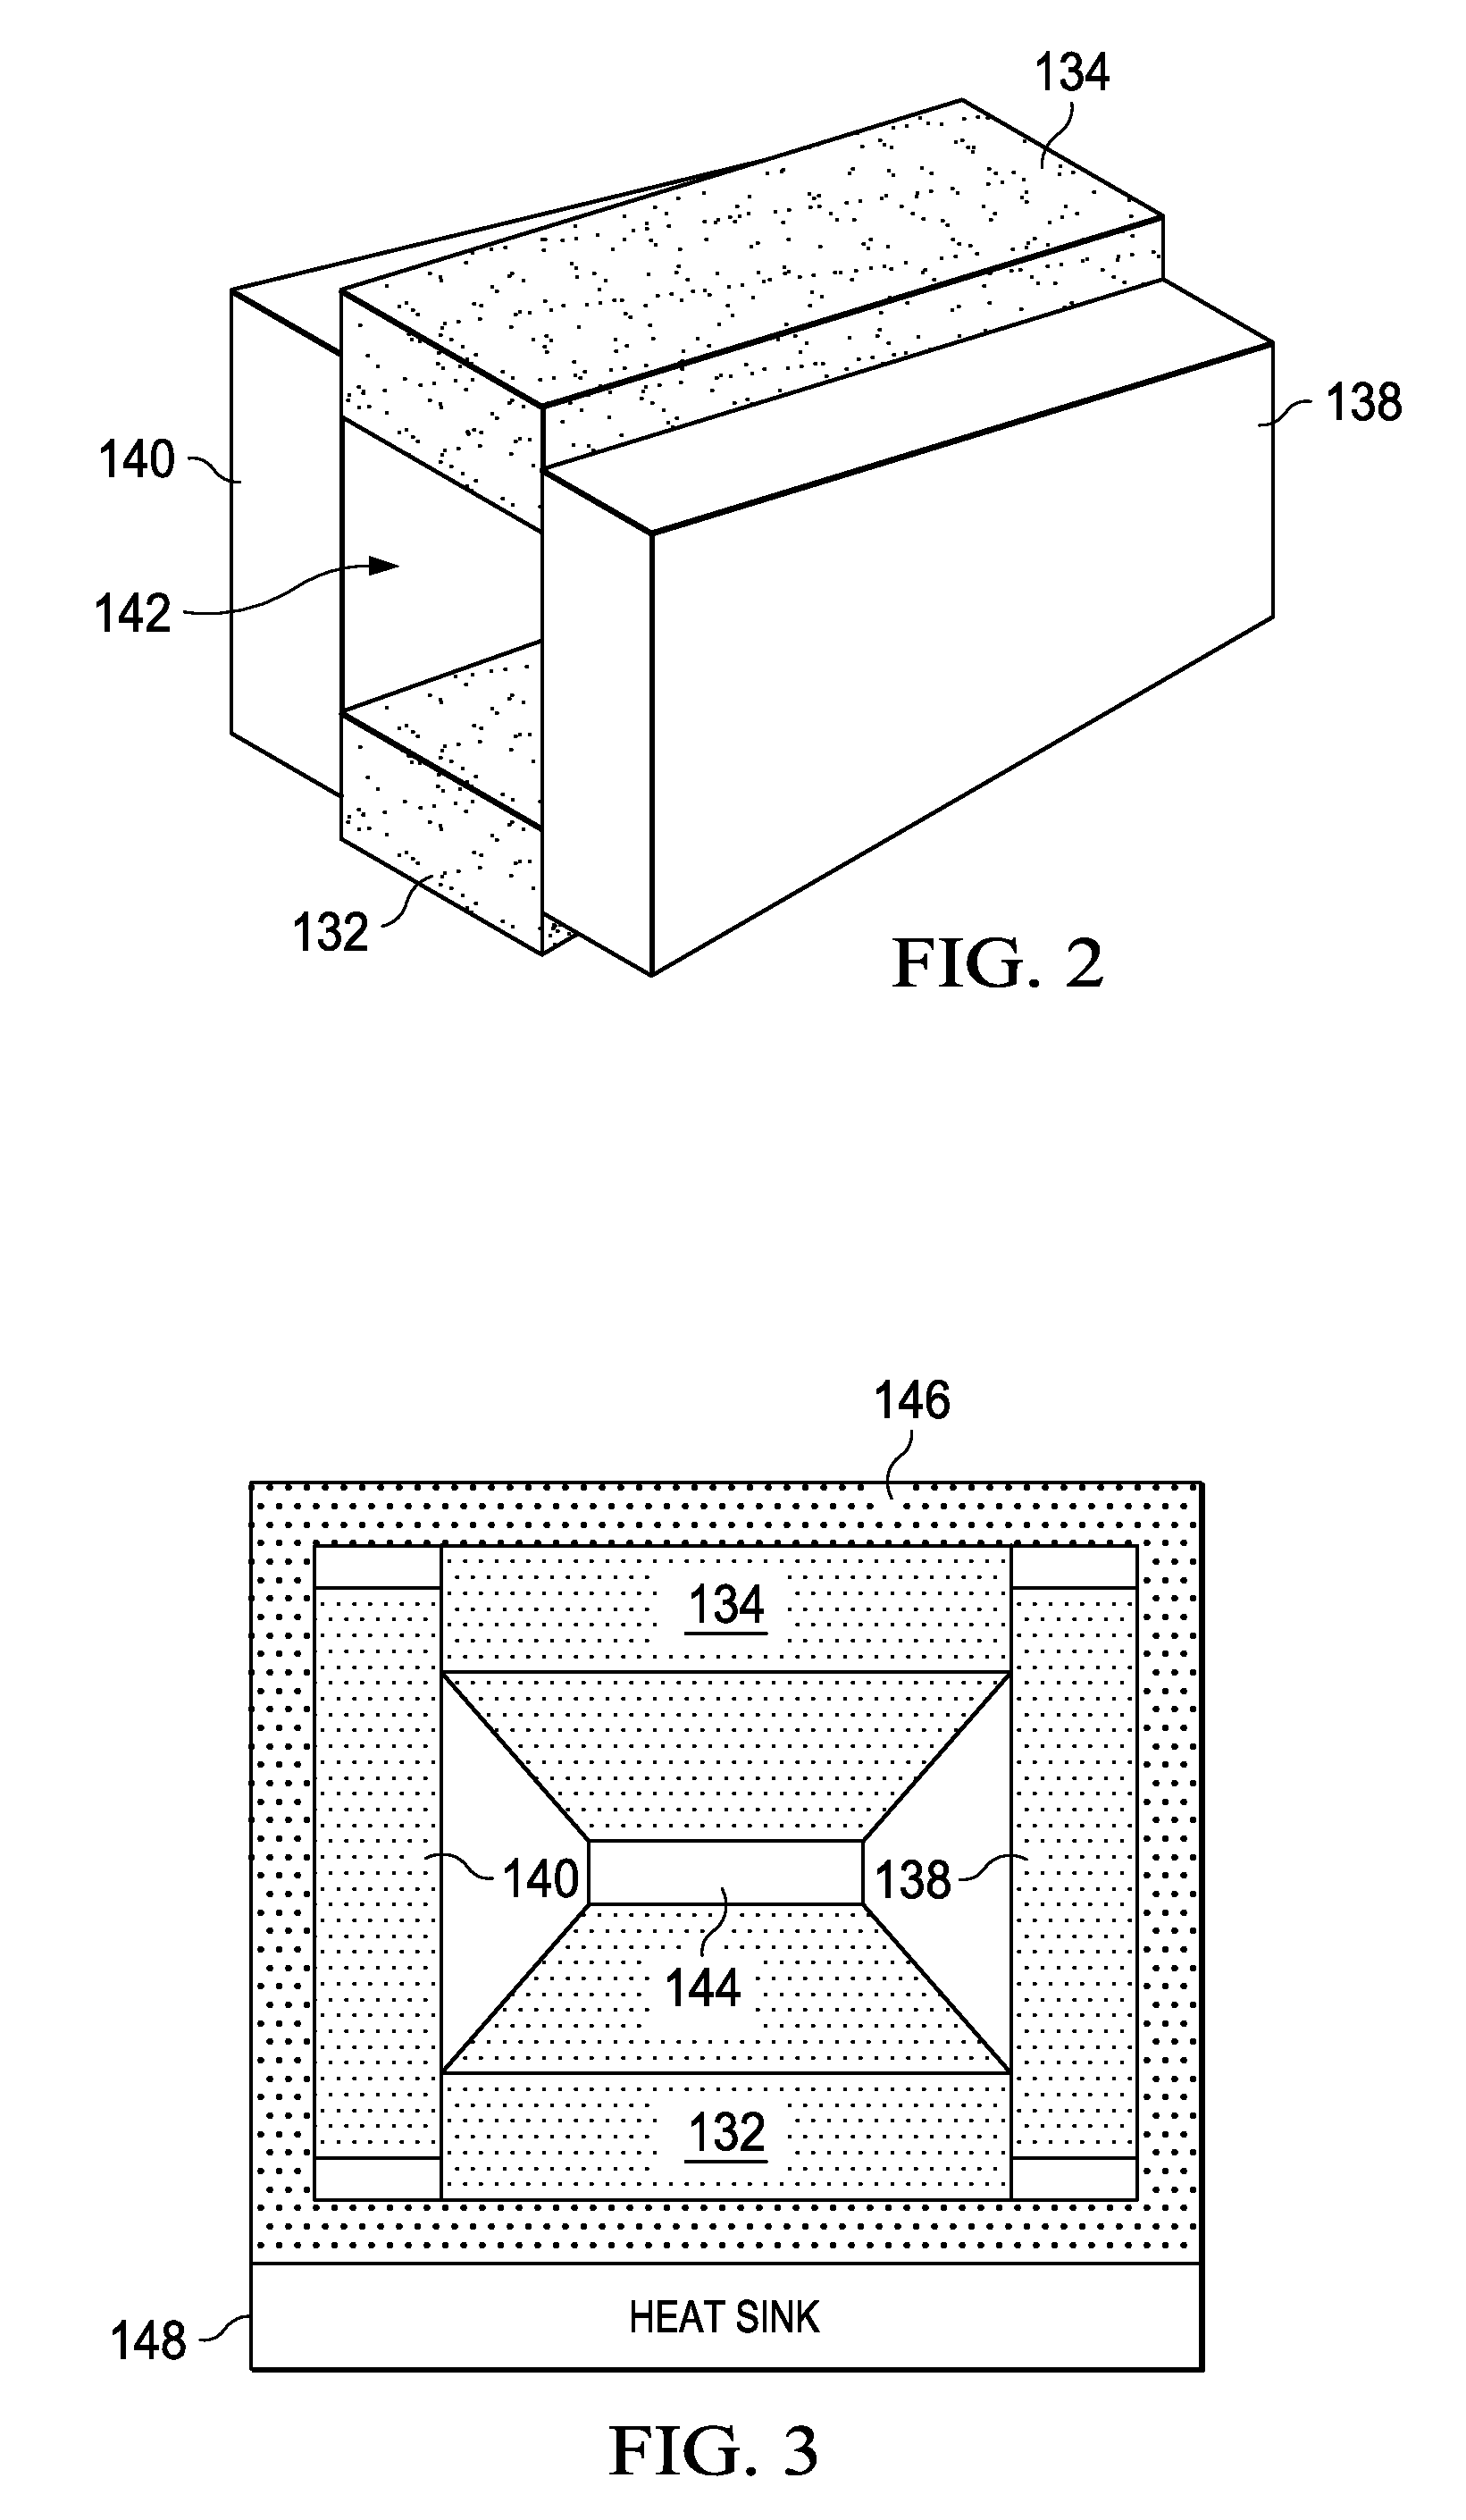 Illumination system with integrated heat dissipation device for use in display systems employing spatial light modulators